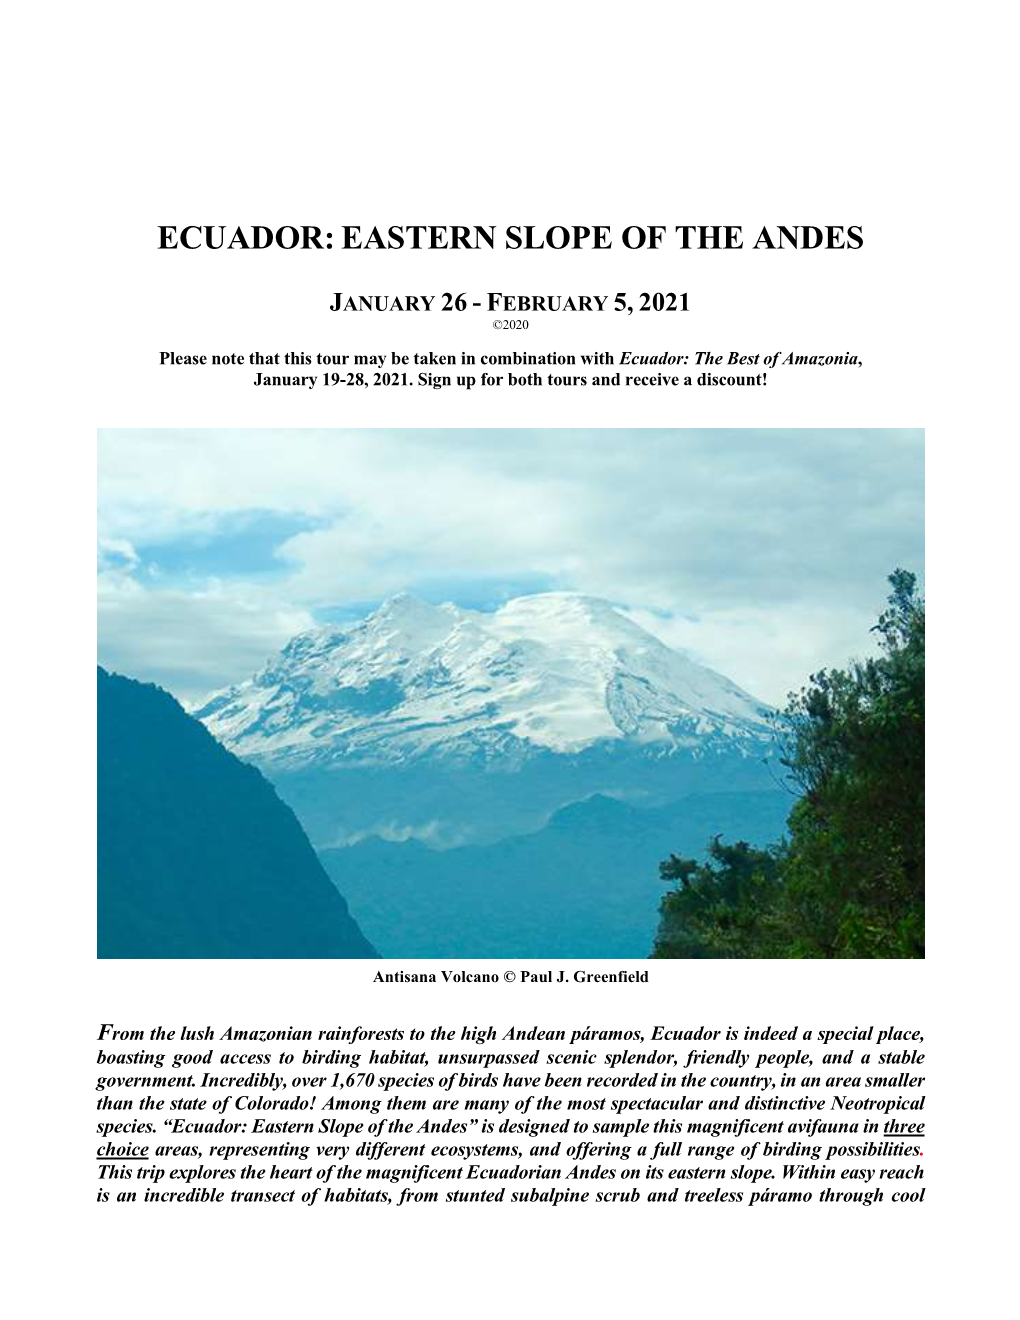 Ecuador:Eastern Slope of the Andes